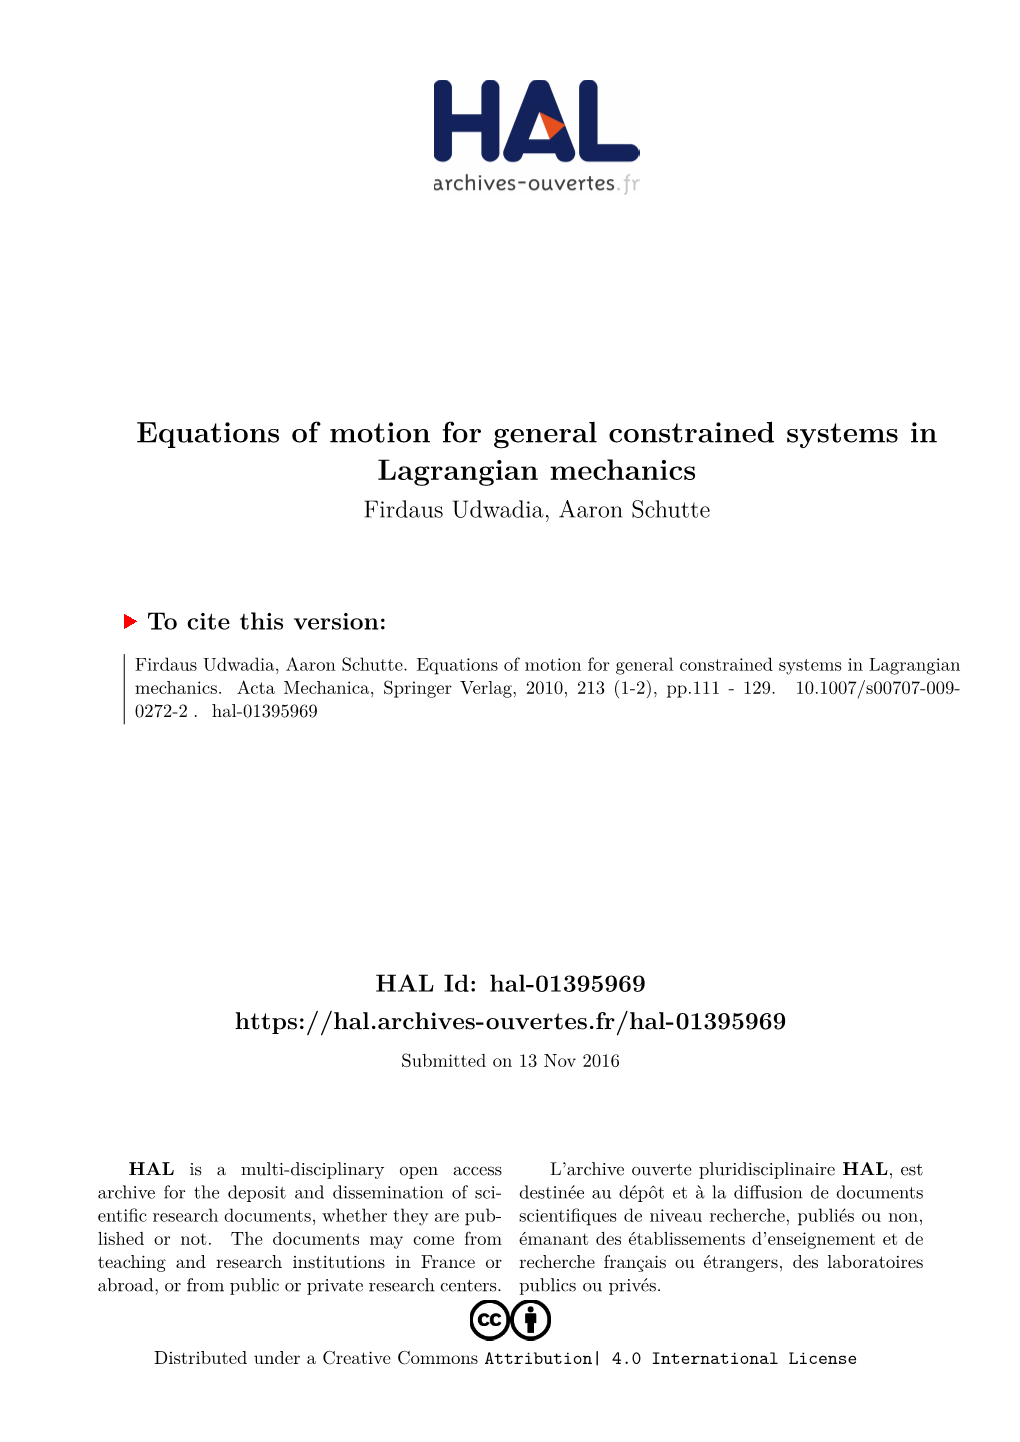 Equations of Motion for General Constrained Systems in Lagrangian Mechanics Firdaus Udwadia, Aaron Schutte